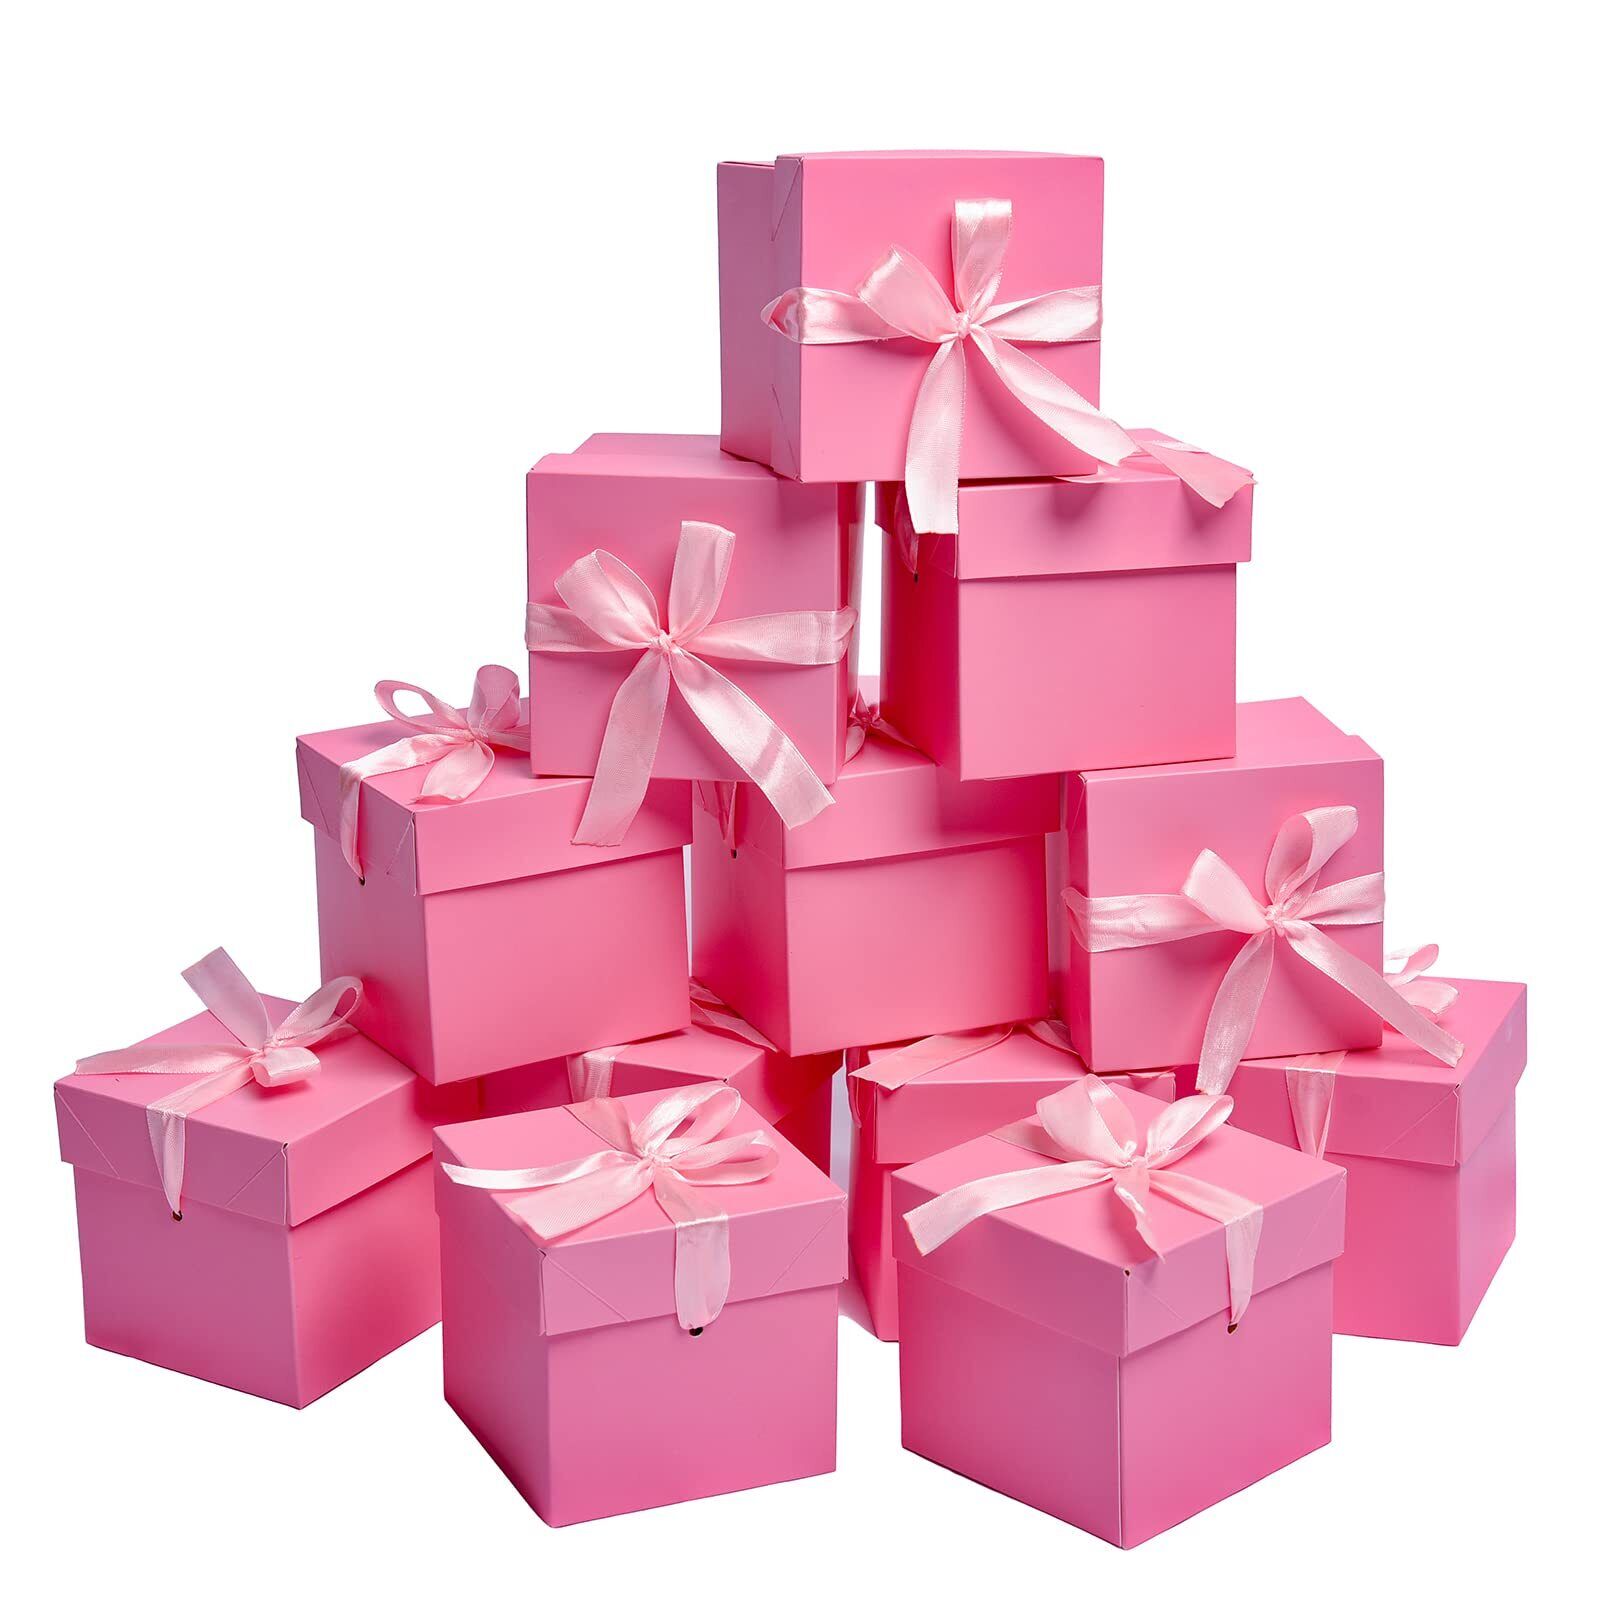 6”×6”×6”Pink Gift Boxes with Lids12 Pcs Beautiful Squared Boxes with Ribbon P...